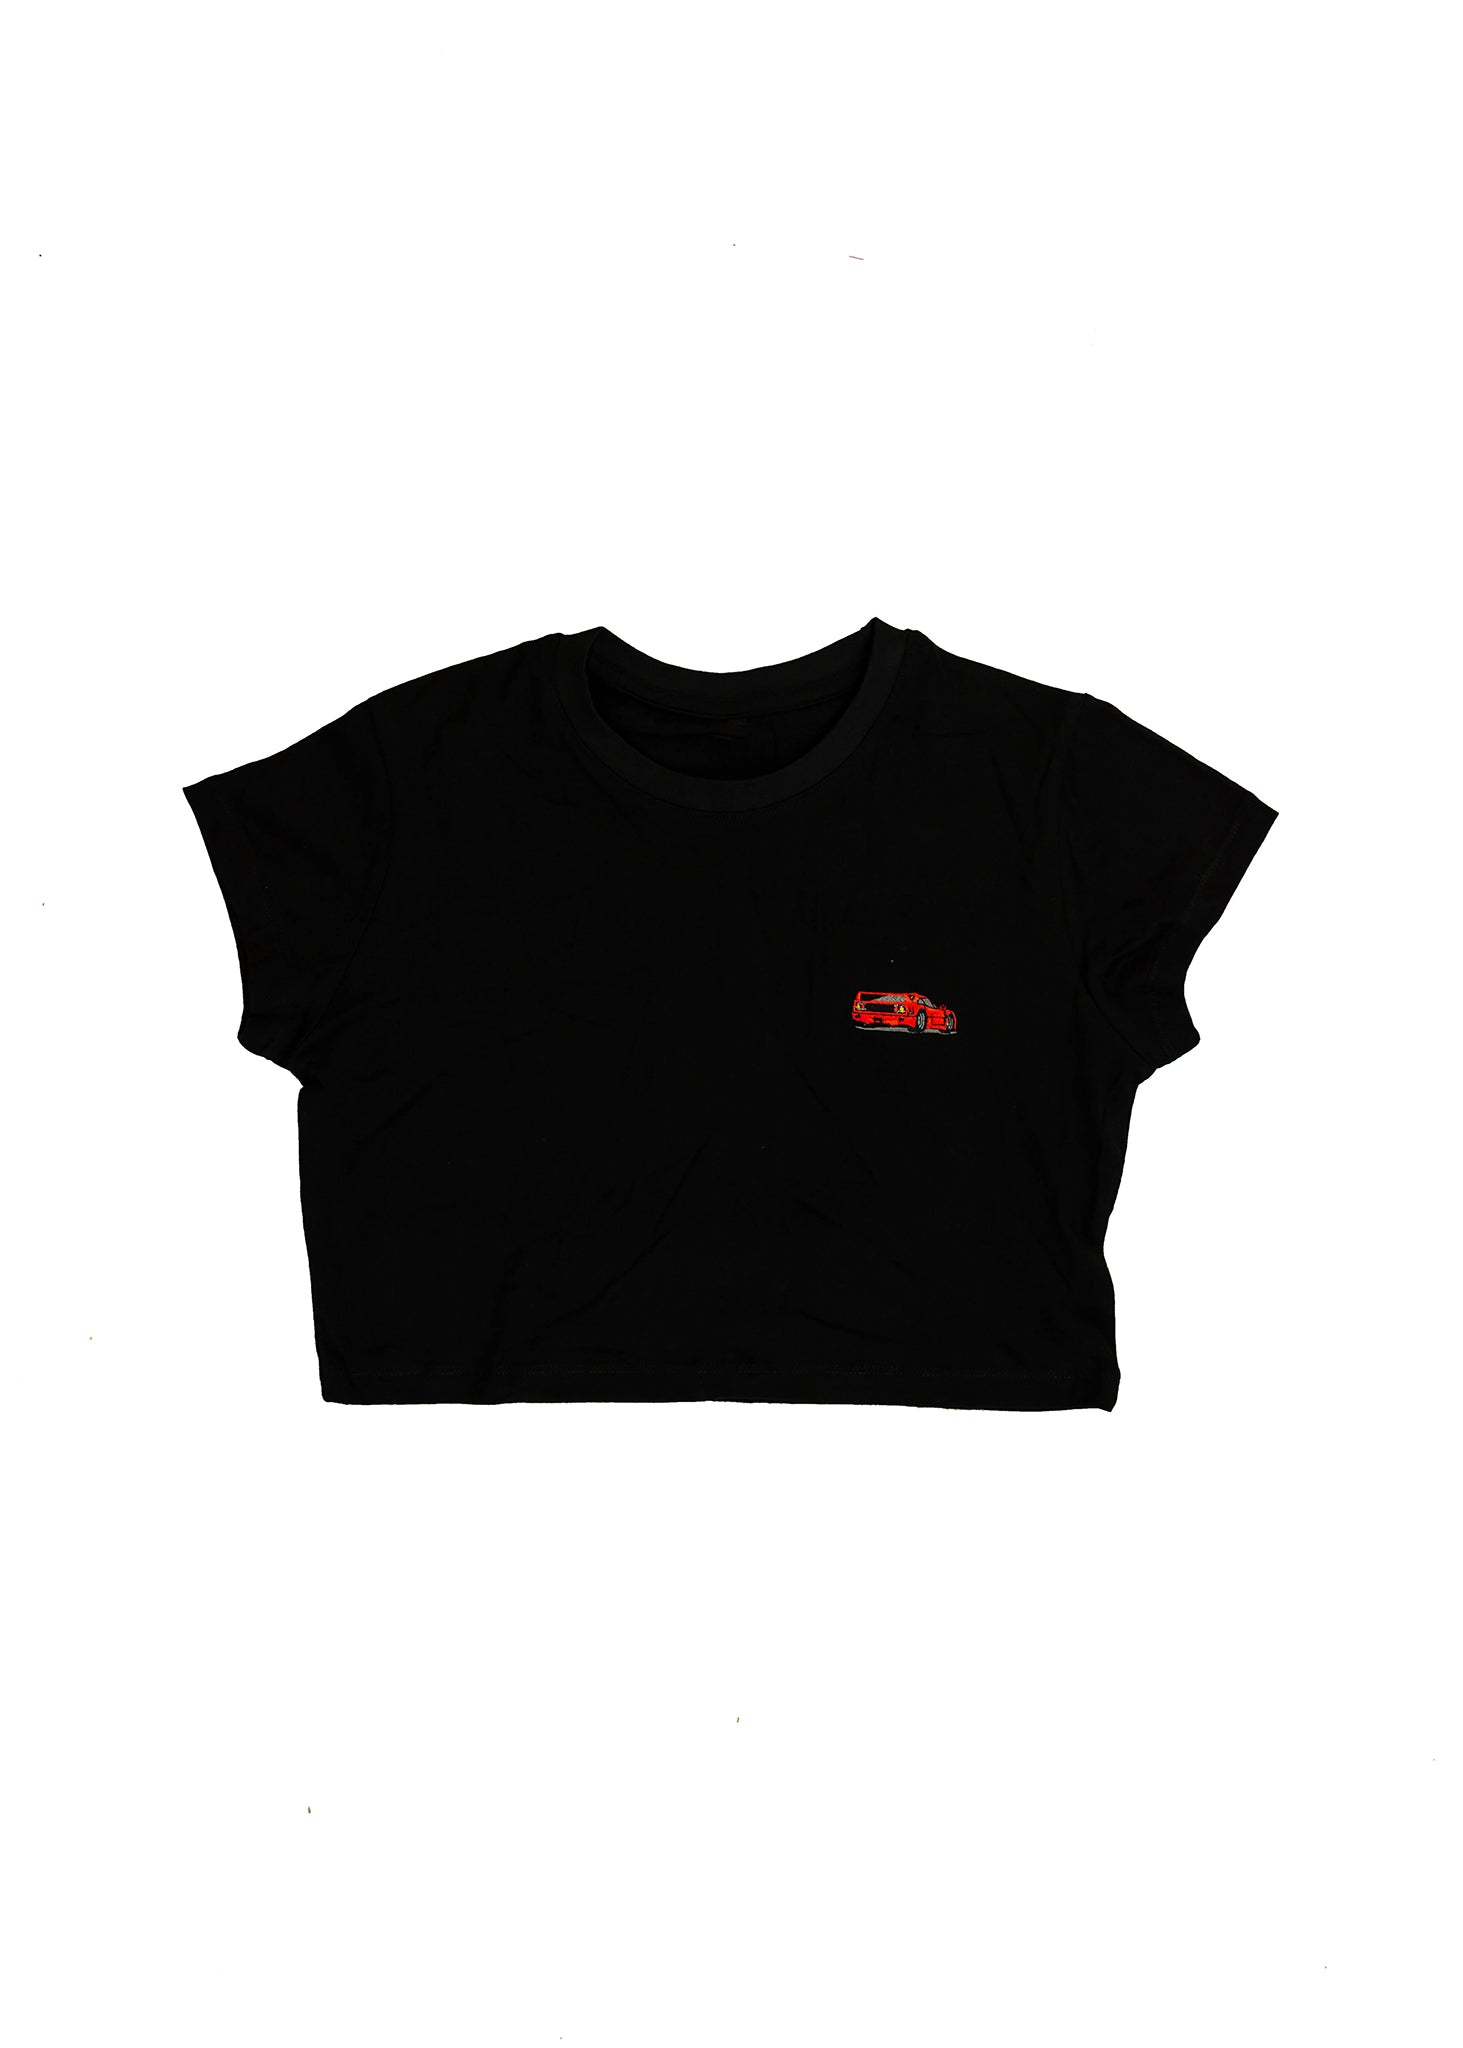 A black women's high quality cropped t-shirt. Full size front view of the black shirt with a red embroidered F40. Fabric composition of this tee is 100% cotton. The material is very soft, stretchy, and non-transparent. The style of this tshirt is a crewneck, short sleeve, cropped at the waist, with embroidery on the left chest.